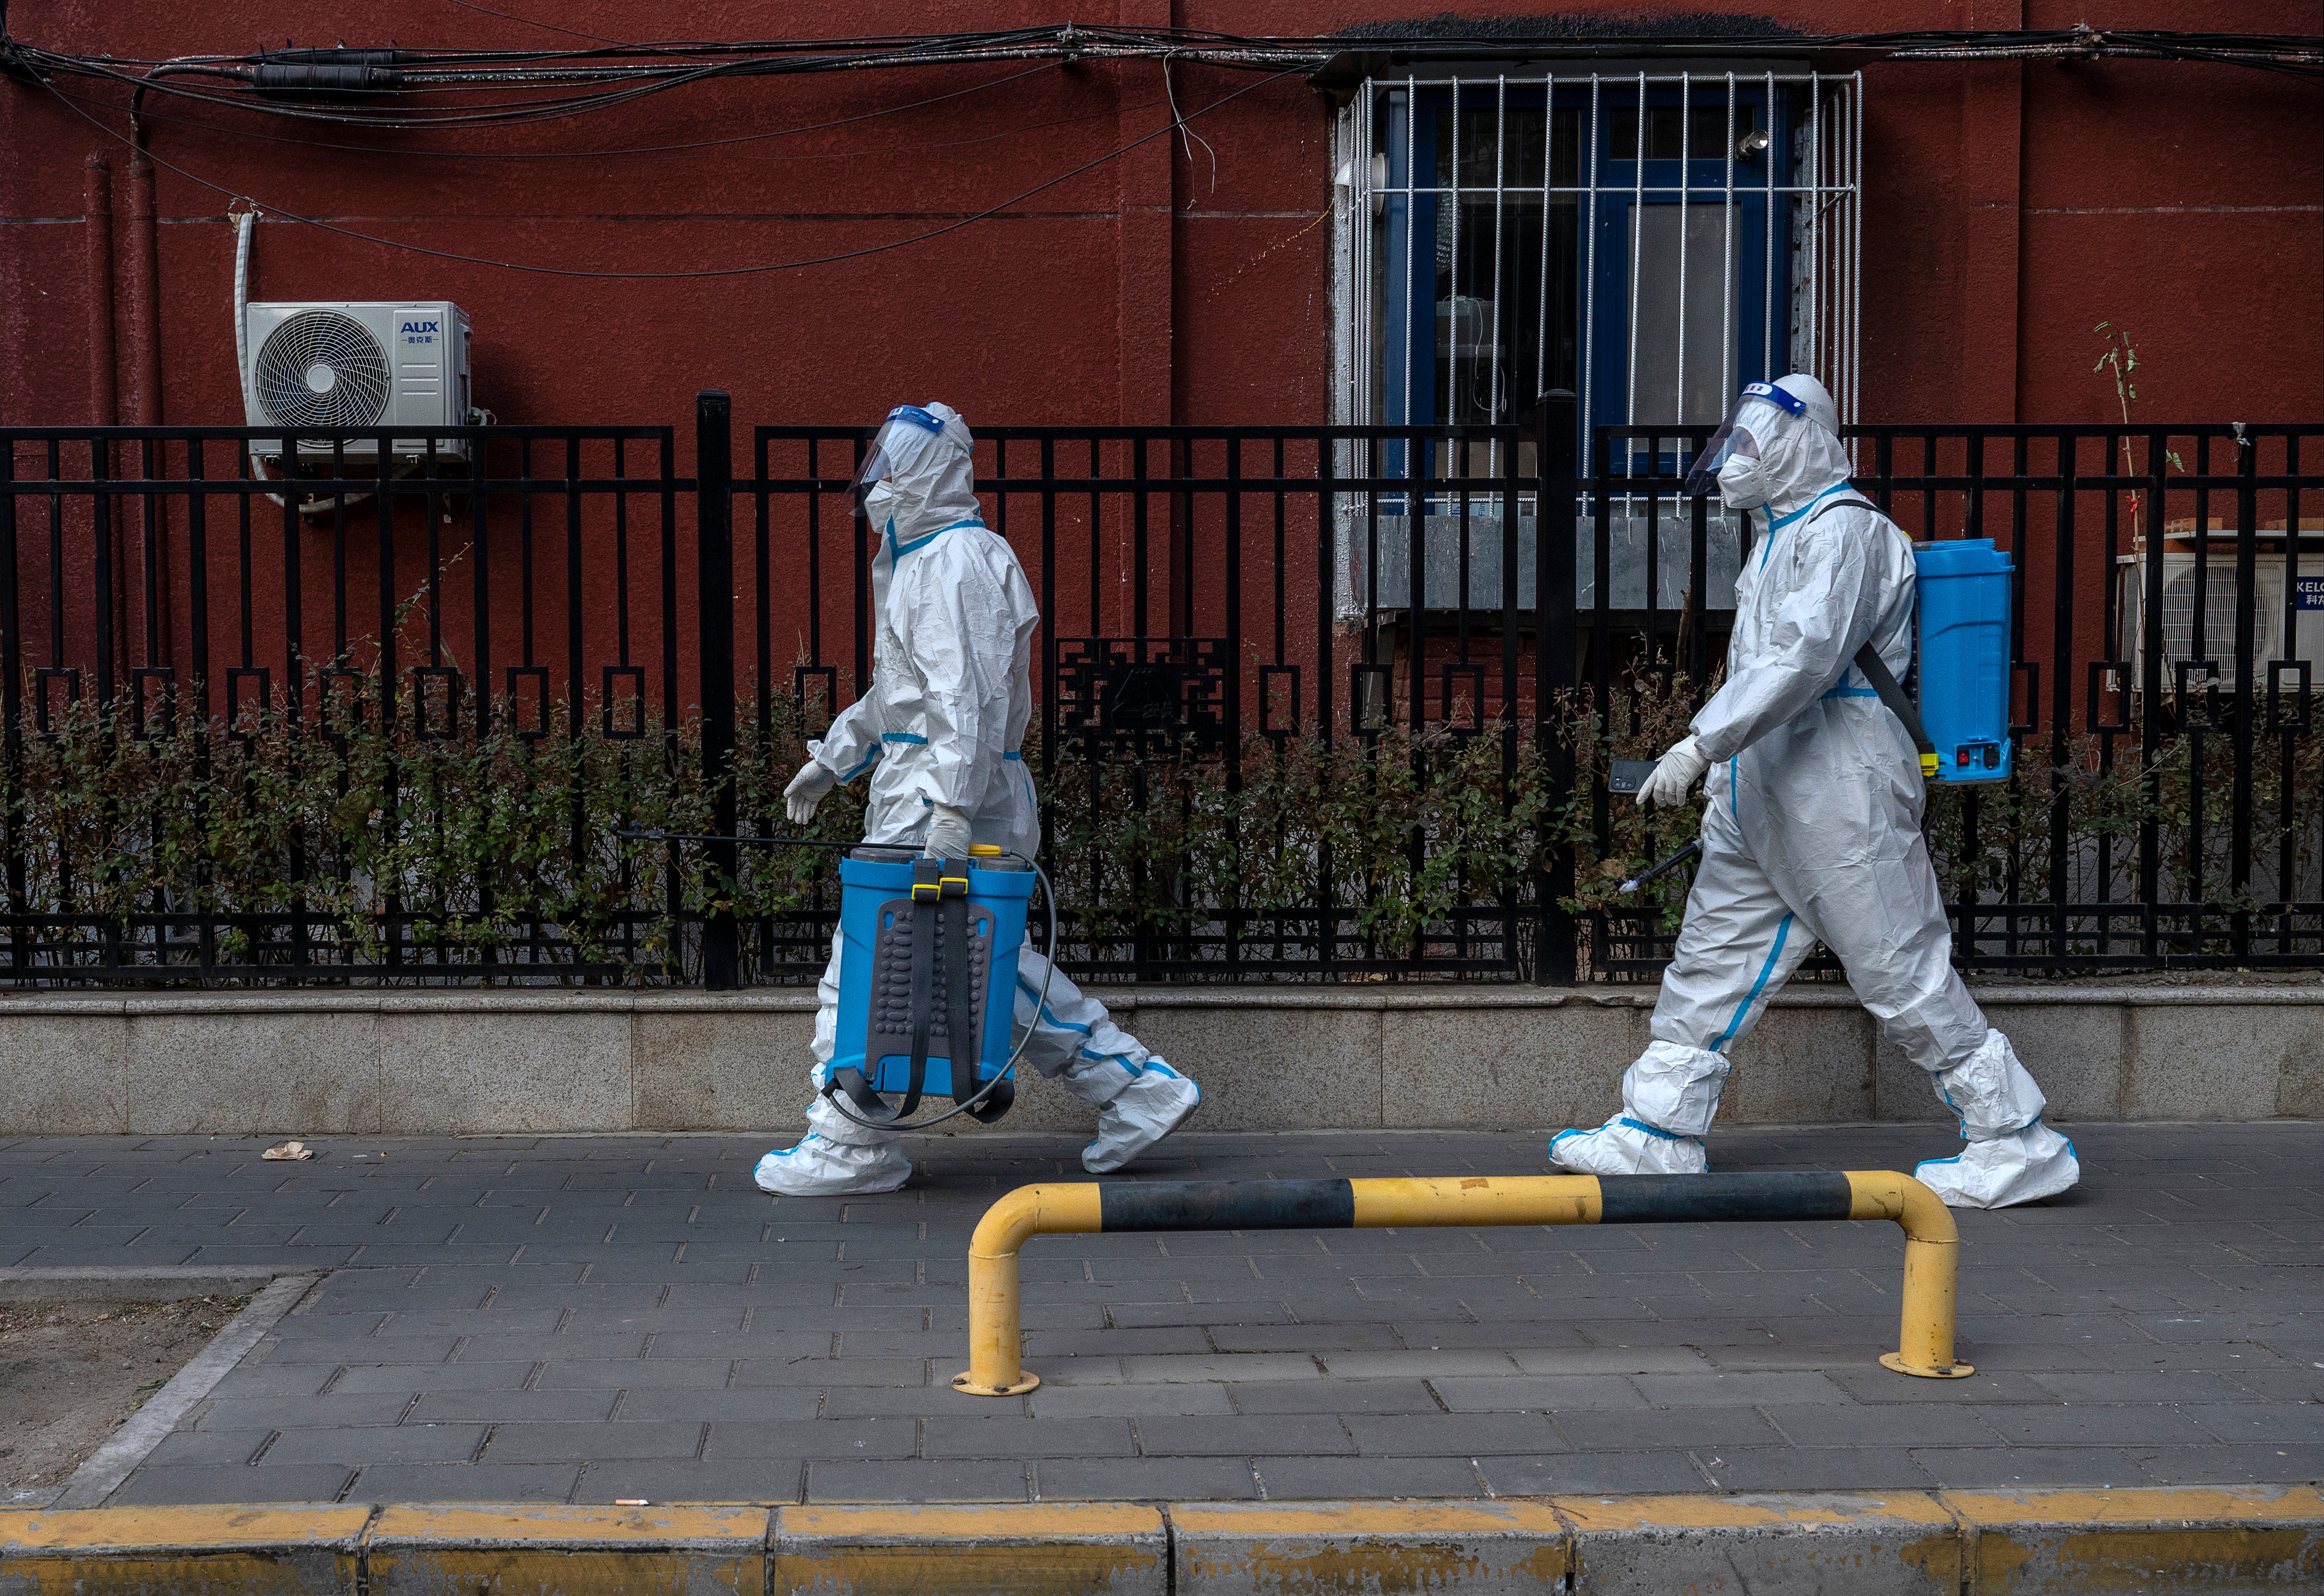 China has been following a zero-Covid policy since the outbreak of the pandemic